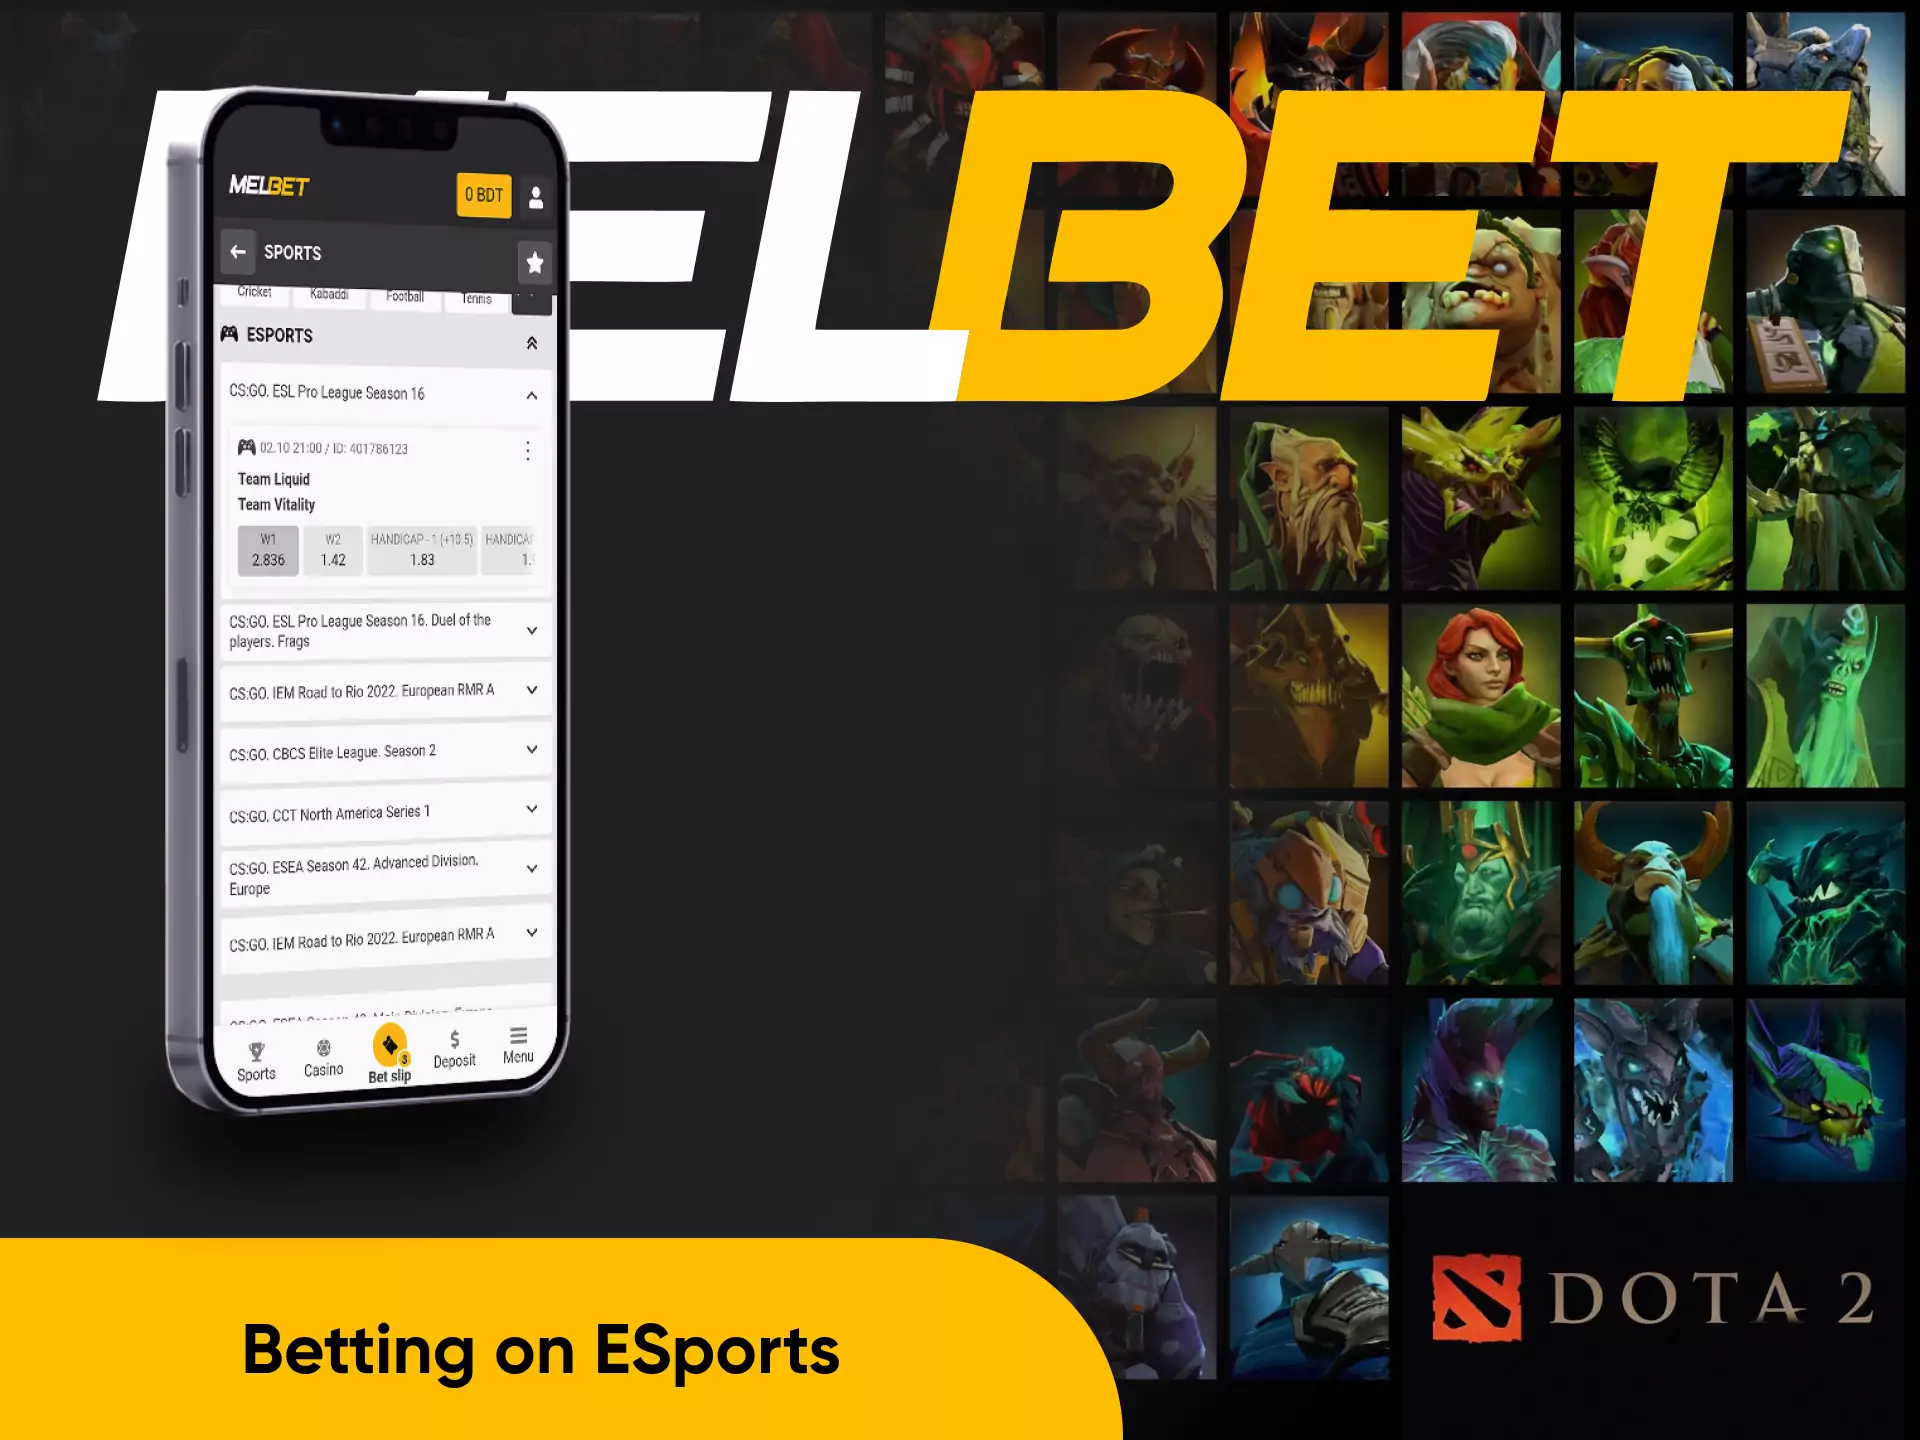 If you are a fan of cyber sports, place bets on your favourite team in the Melbet app.